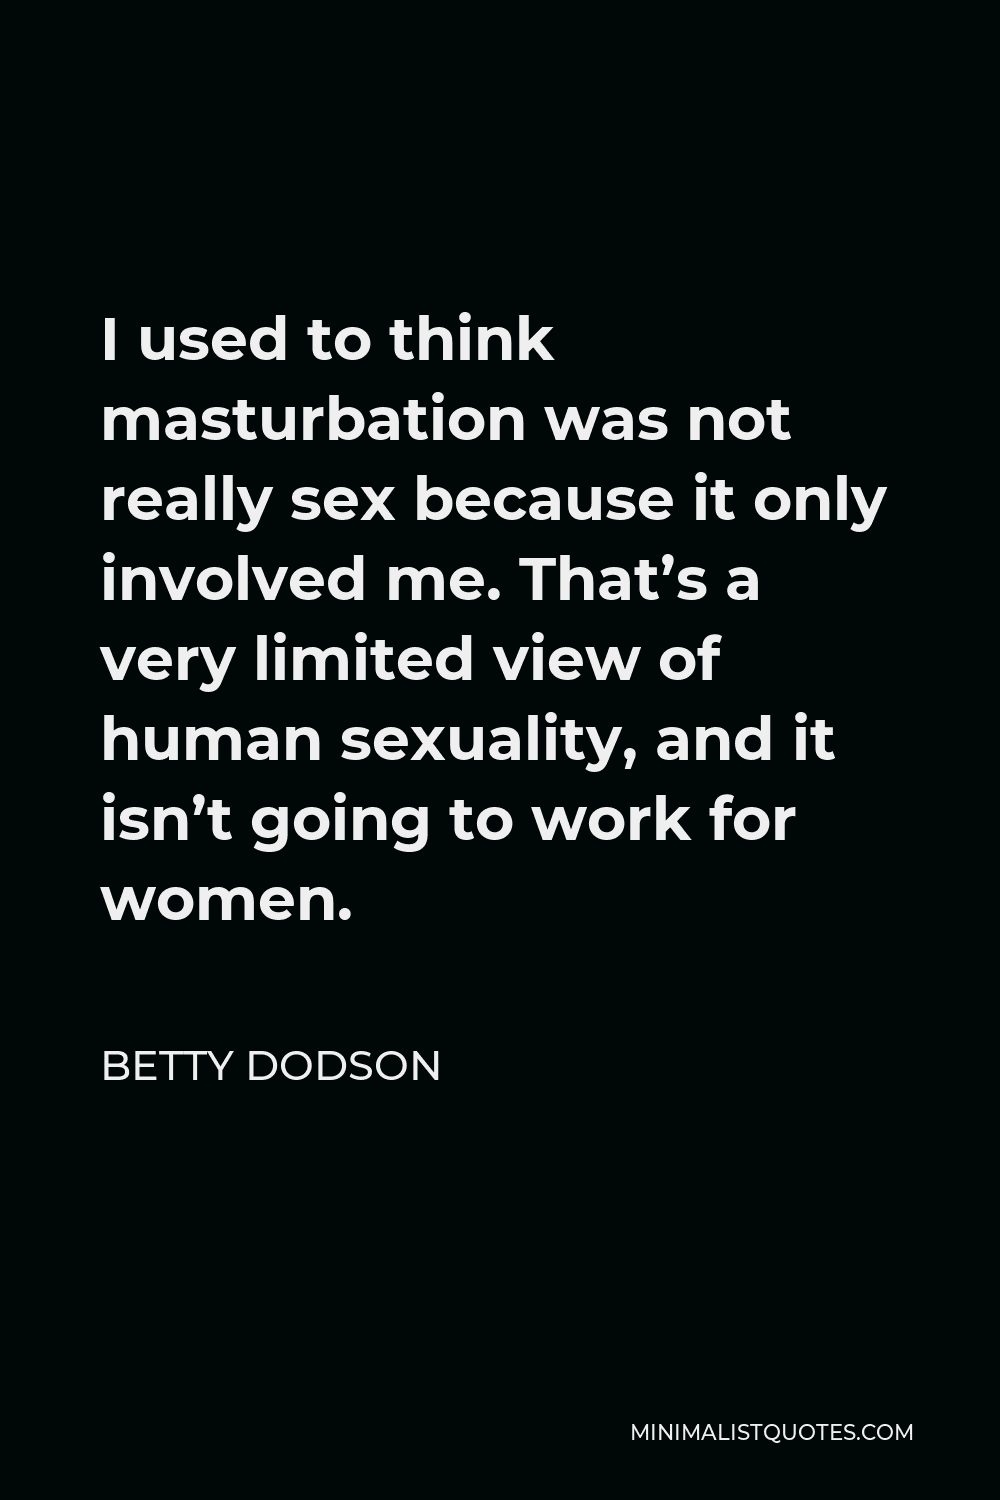 Betty Dodson Quote I used to think masturbation was not really sex because it only involved me